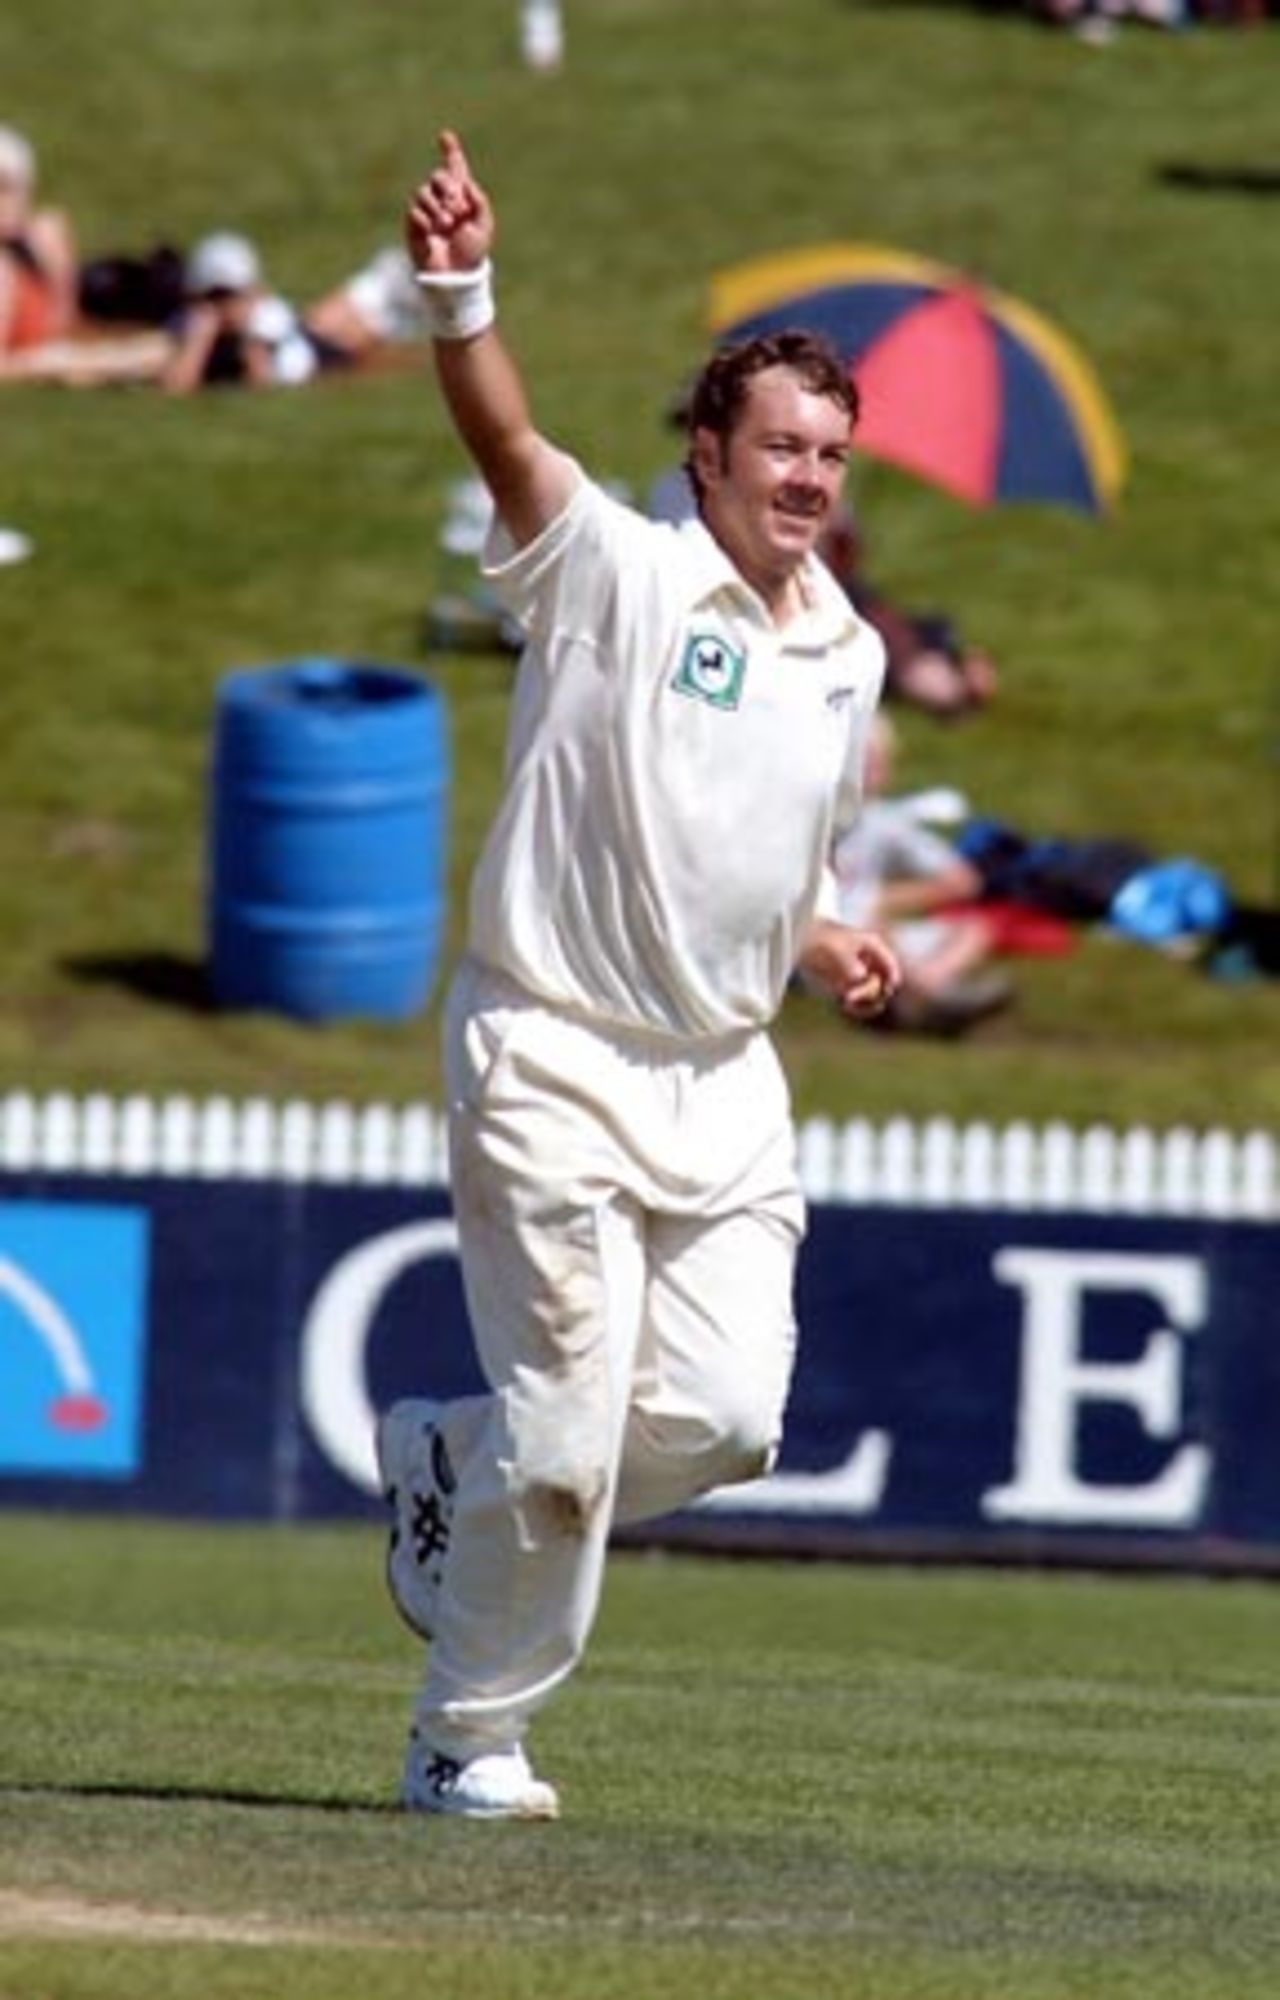 New Zealand bowler Craig McMillan celebrates the dismissal of Bangladesh batsman Sanwar Hossain, caught in the gully by Lou Vincent for 45 in his first innings. 1st Test: New Zealand v Bangladesh at WestpacTrust Park, Hamilton, 18-22 Dec 2001 (21 December 2001).